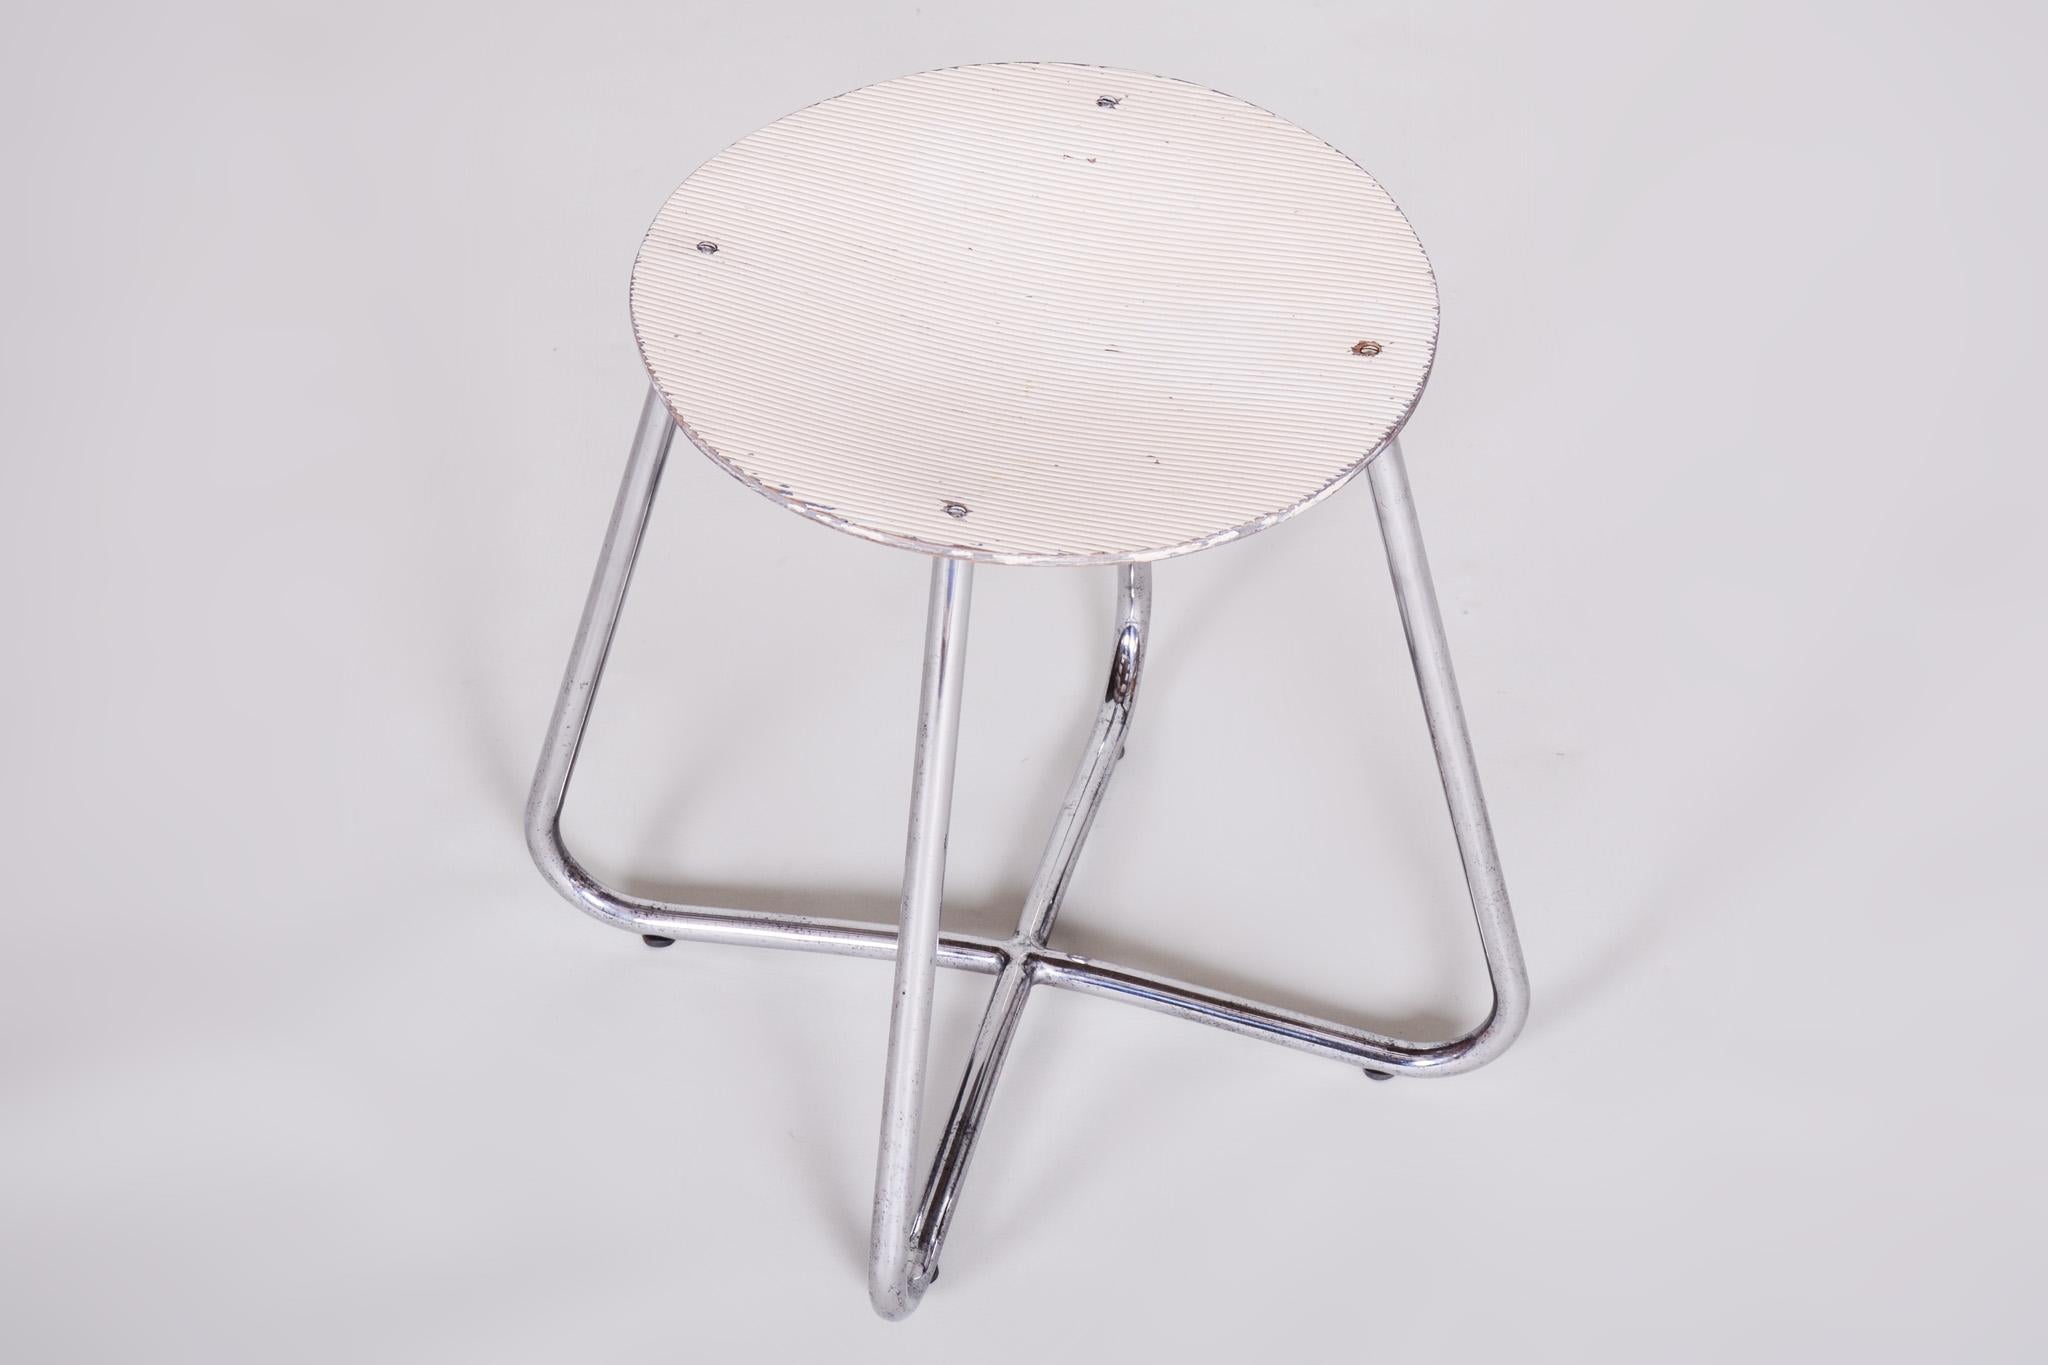 Small Round Bauhaus Chrome Stool by Vichr & Spol, Original Paint, 1930s In Good Condition For Sale In Horomerice, CZ